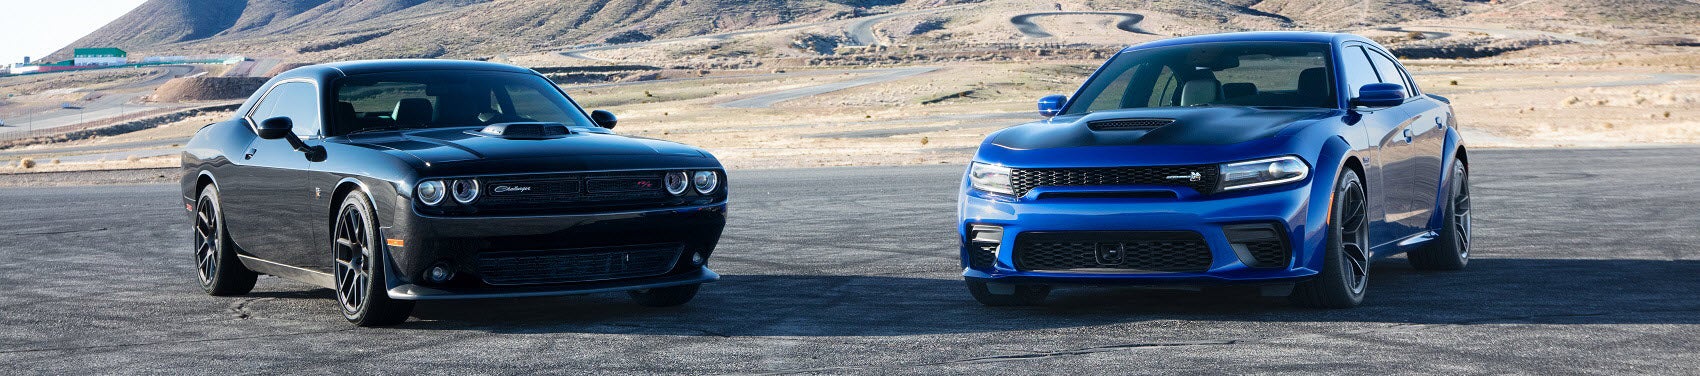 Dodge Charger & Challenger